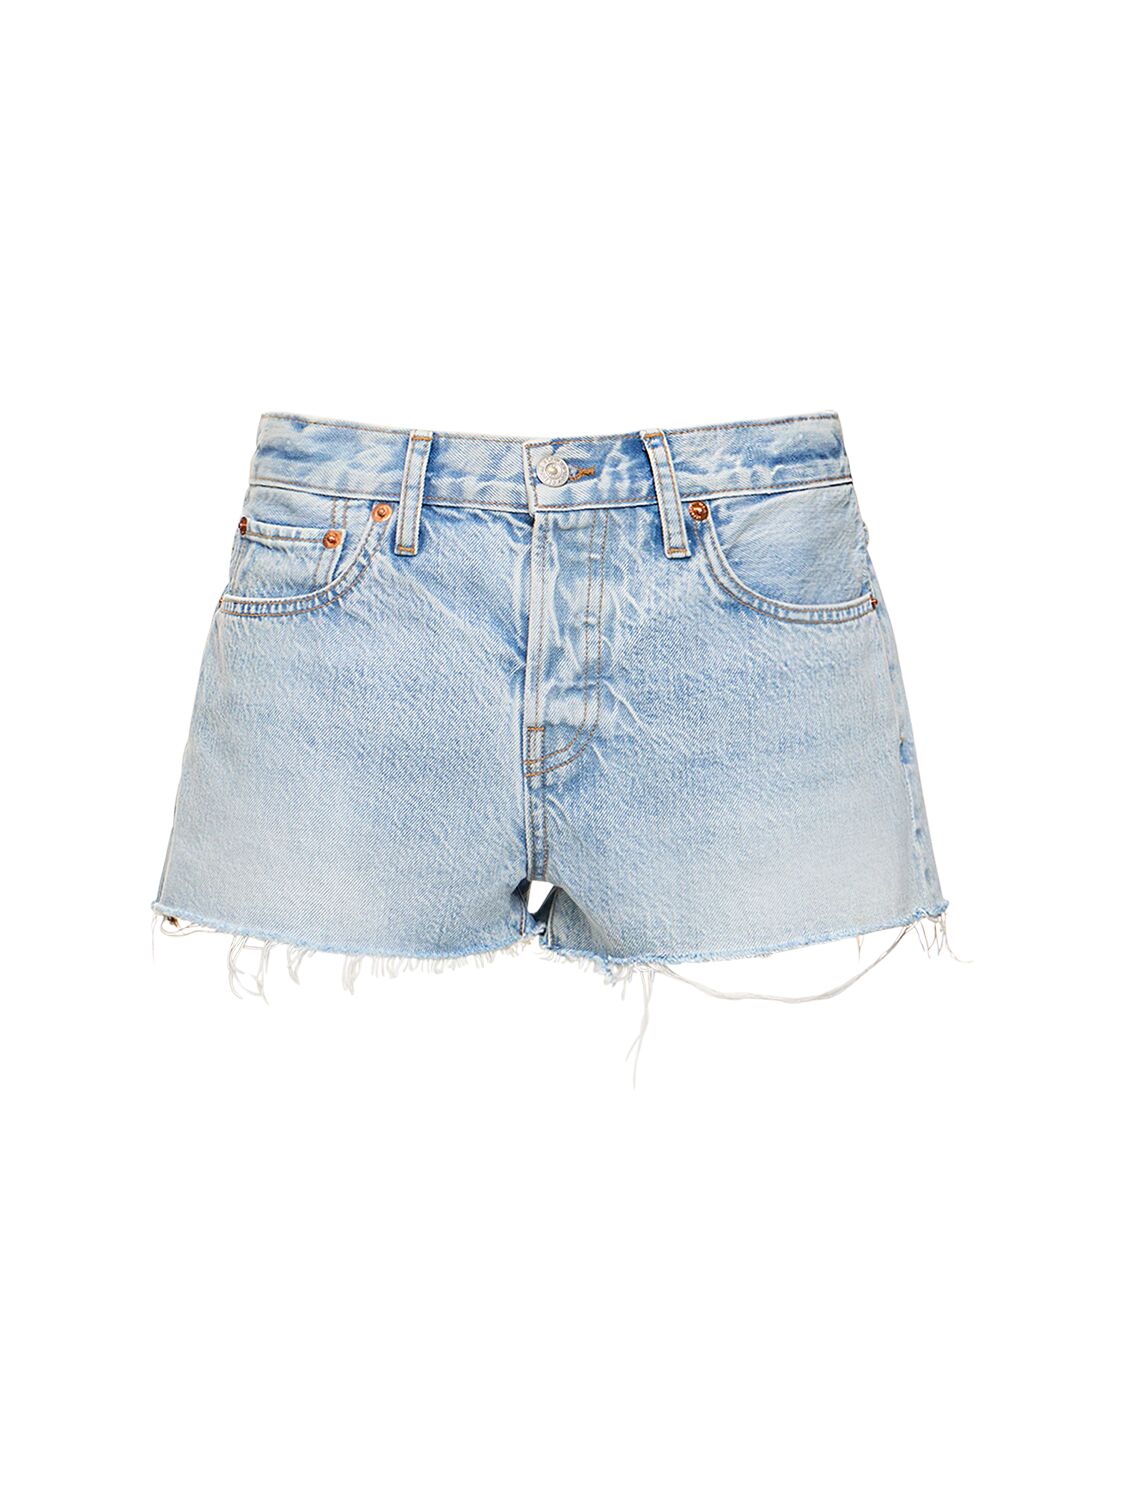 Image of Re/done & Pam Mid Rise Denim Shorts